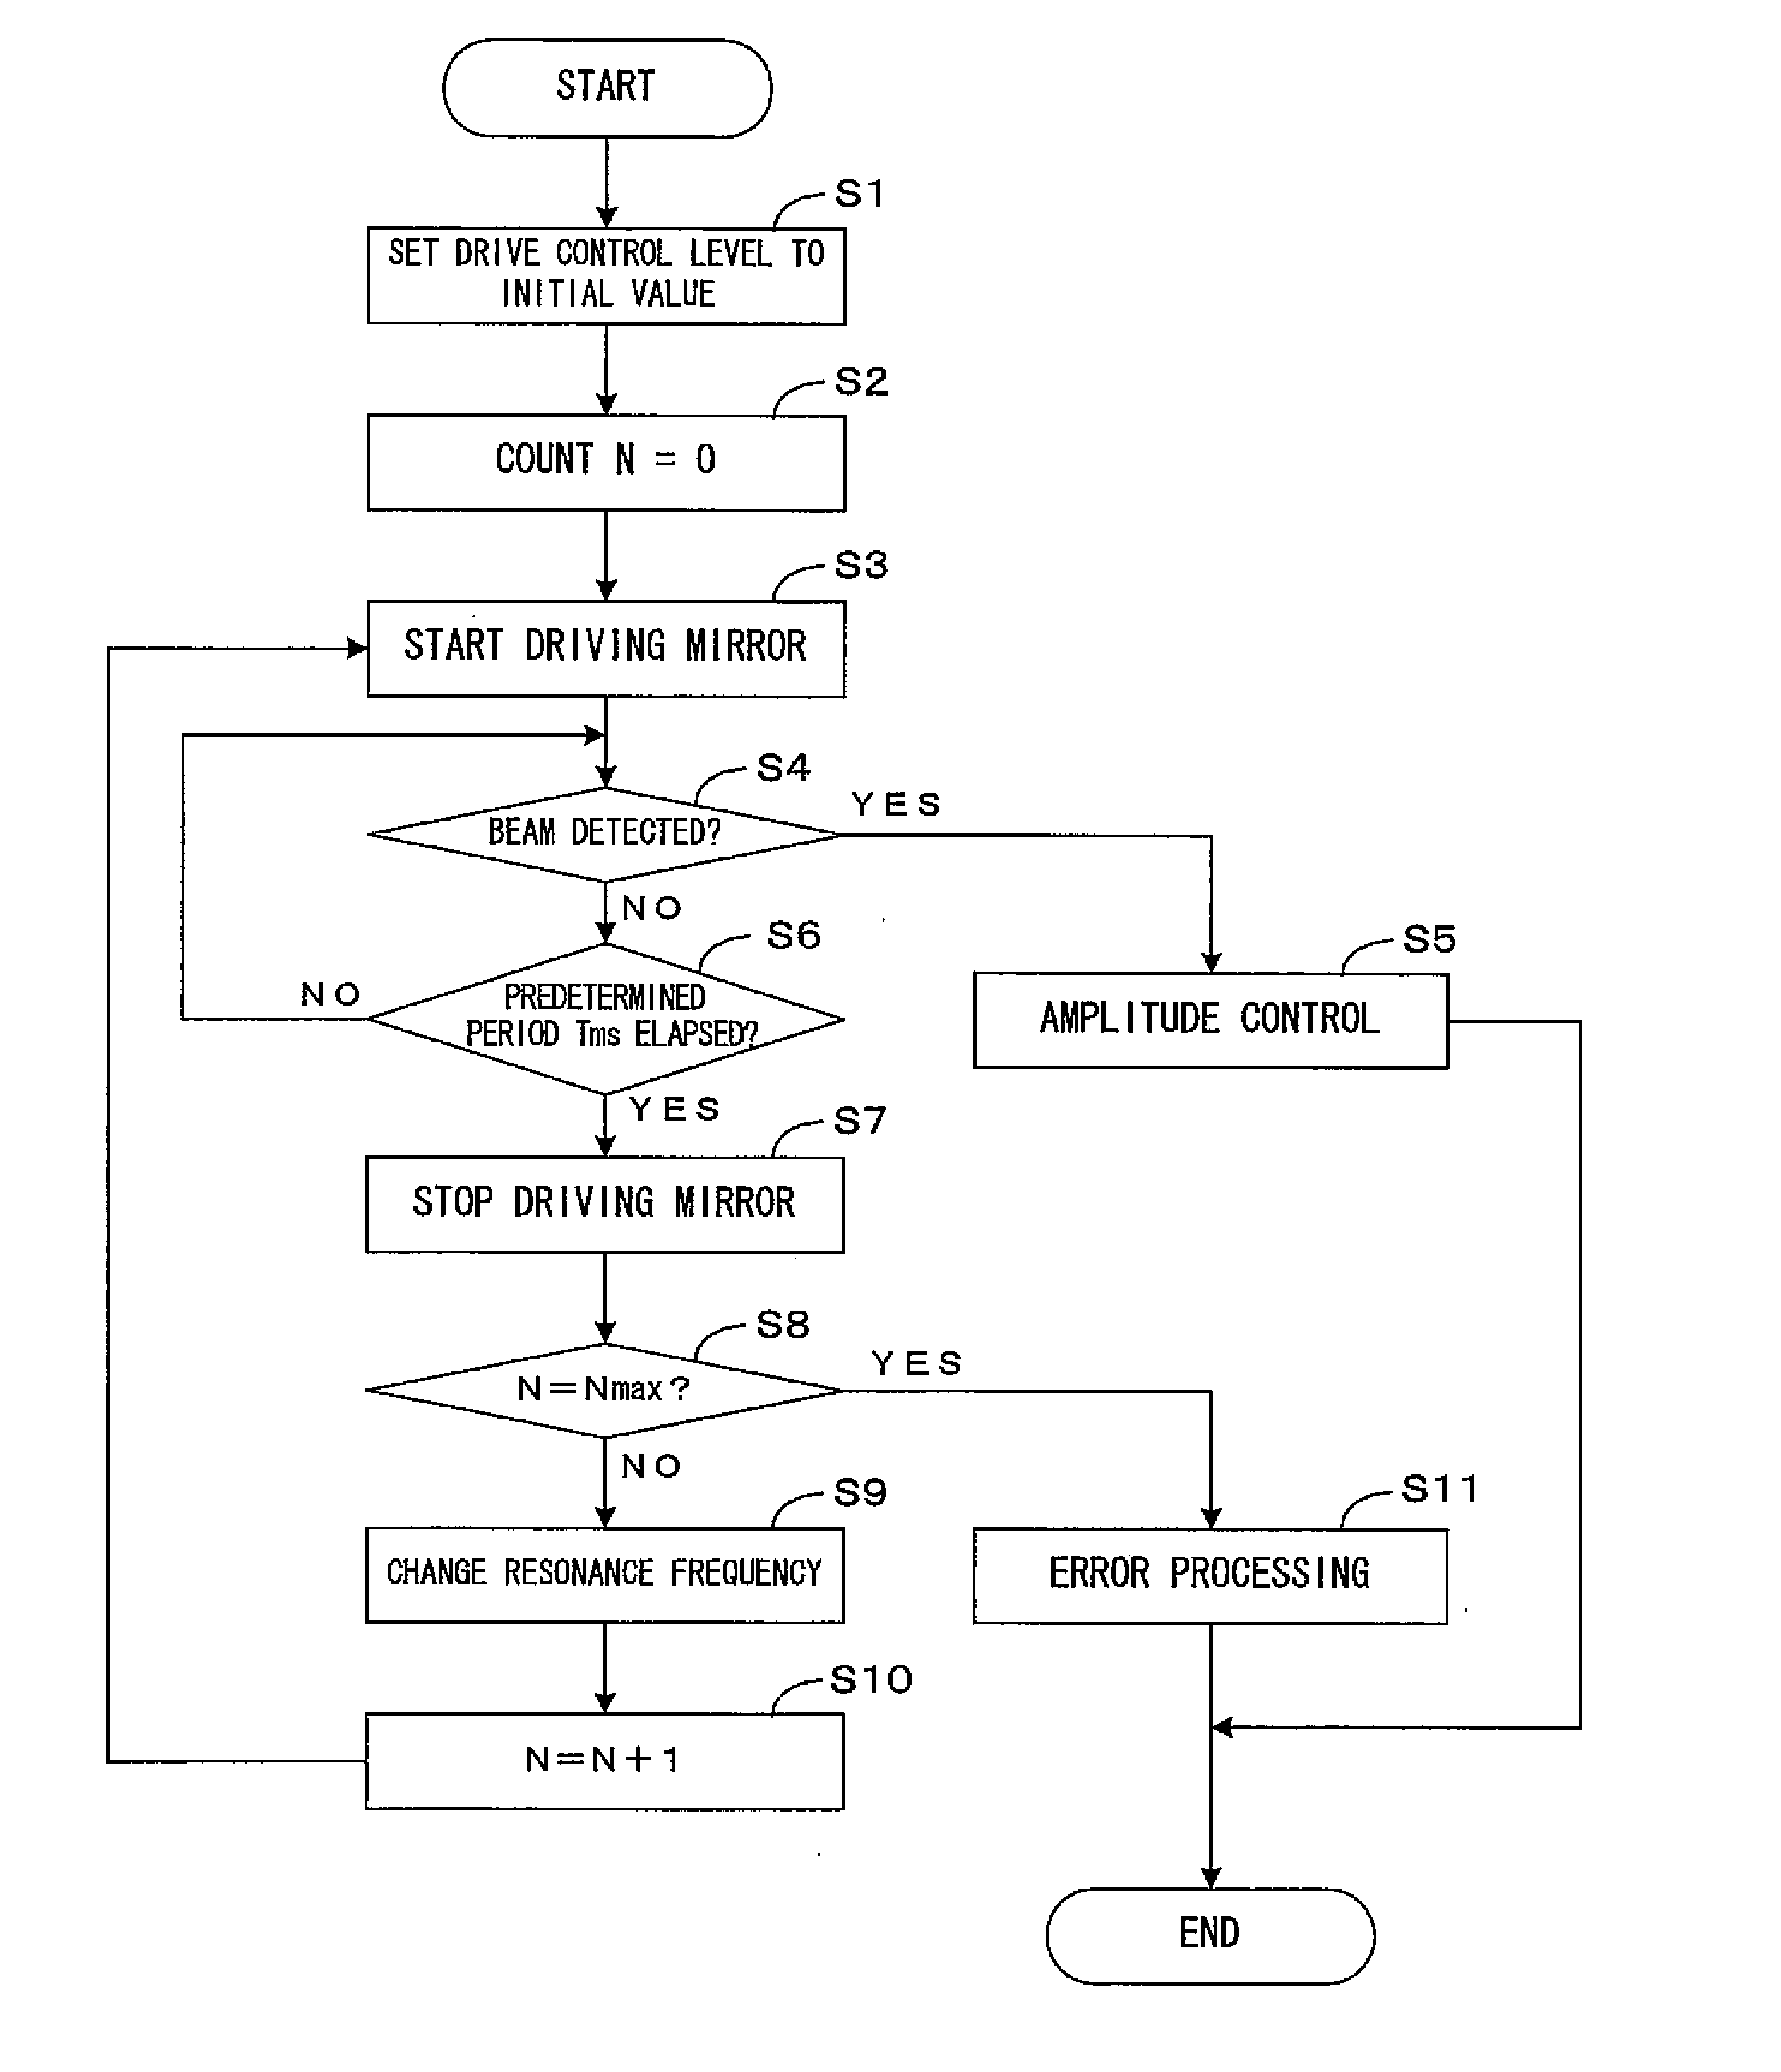 Light scanning apparatus, method of controlling the same and image forming apparatus equipped with the same